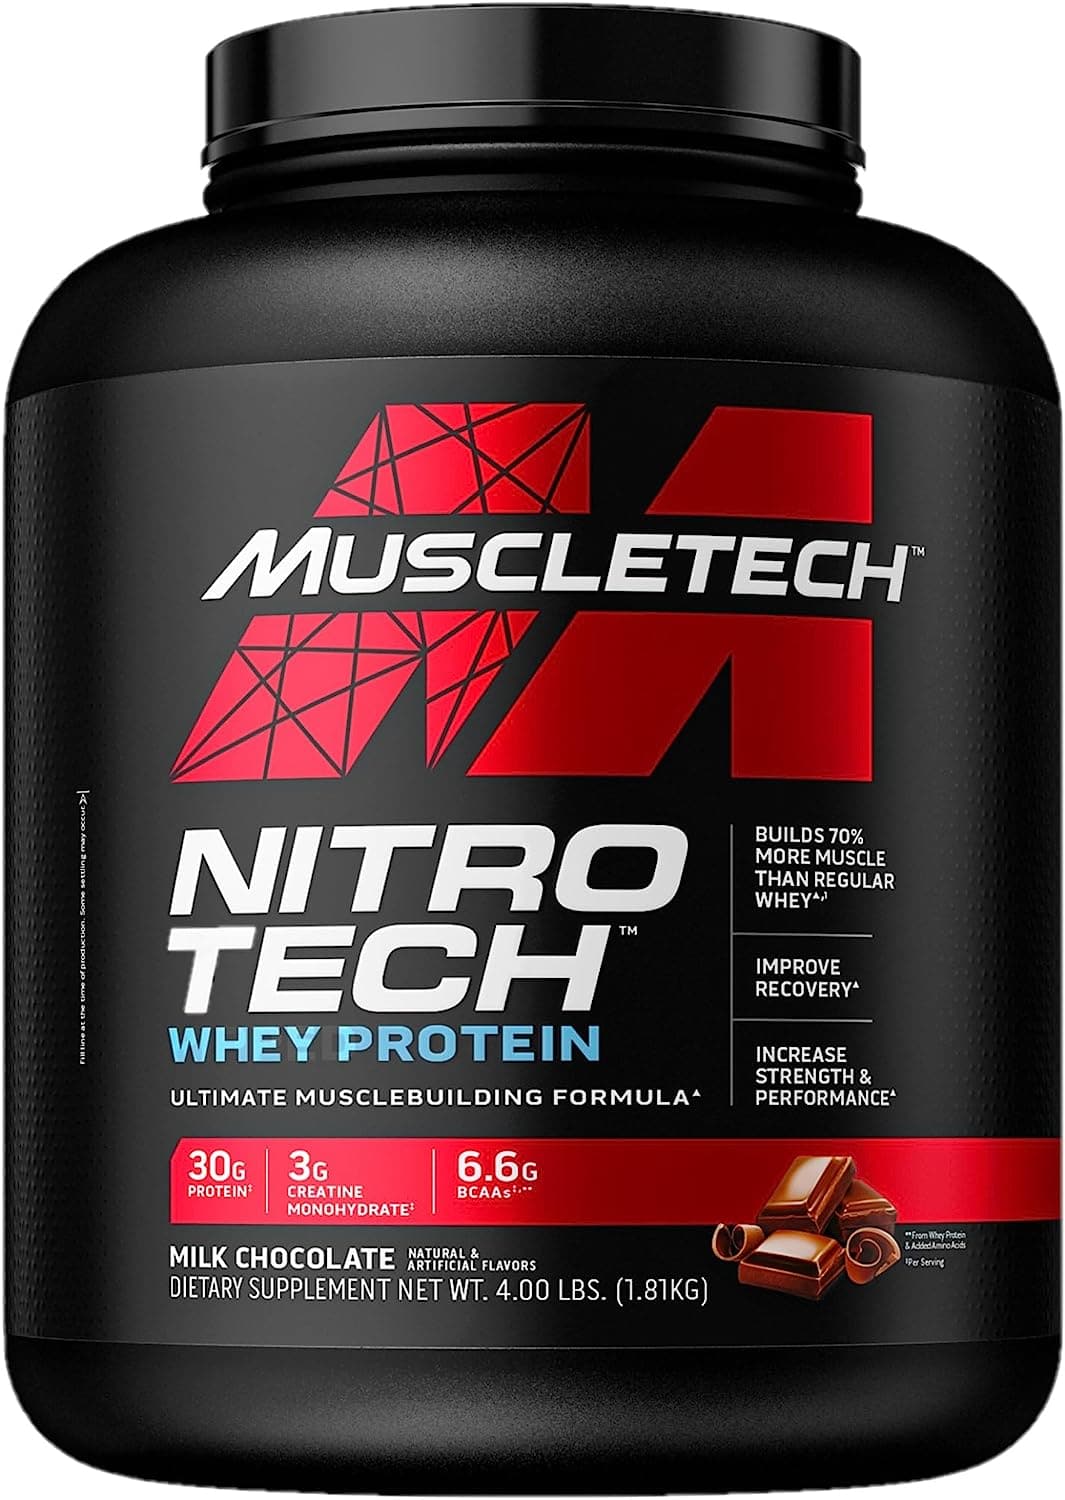 MuscleTech Nitro-Tech Whey Protein Isolate & Peptides for Muscle Gain, Milk Chocolate, 4 lbs - 1.81 Kg